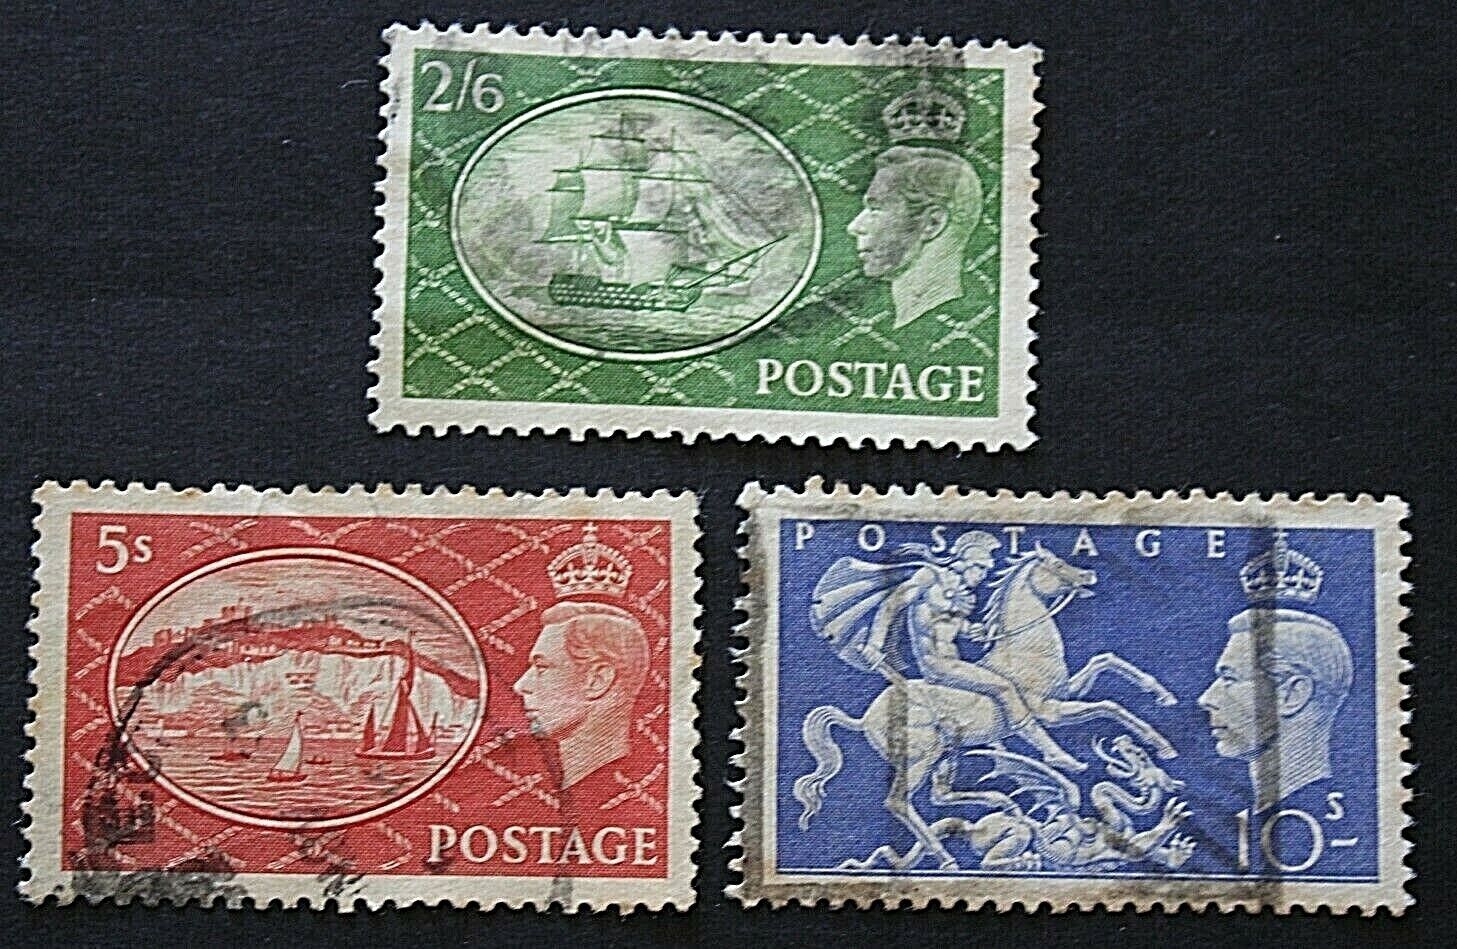 Great Britain - 1951 - 2/6, 5/- & 10/- Used Stamps Без бренда